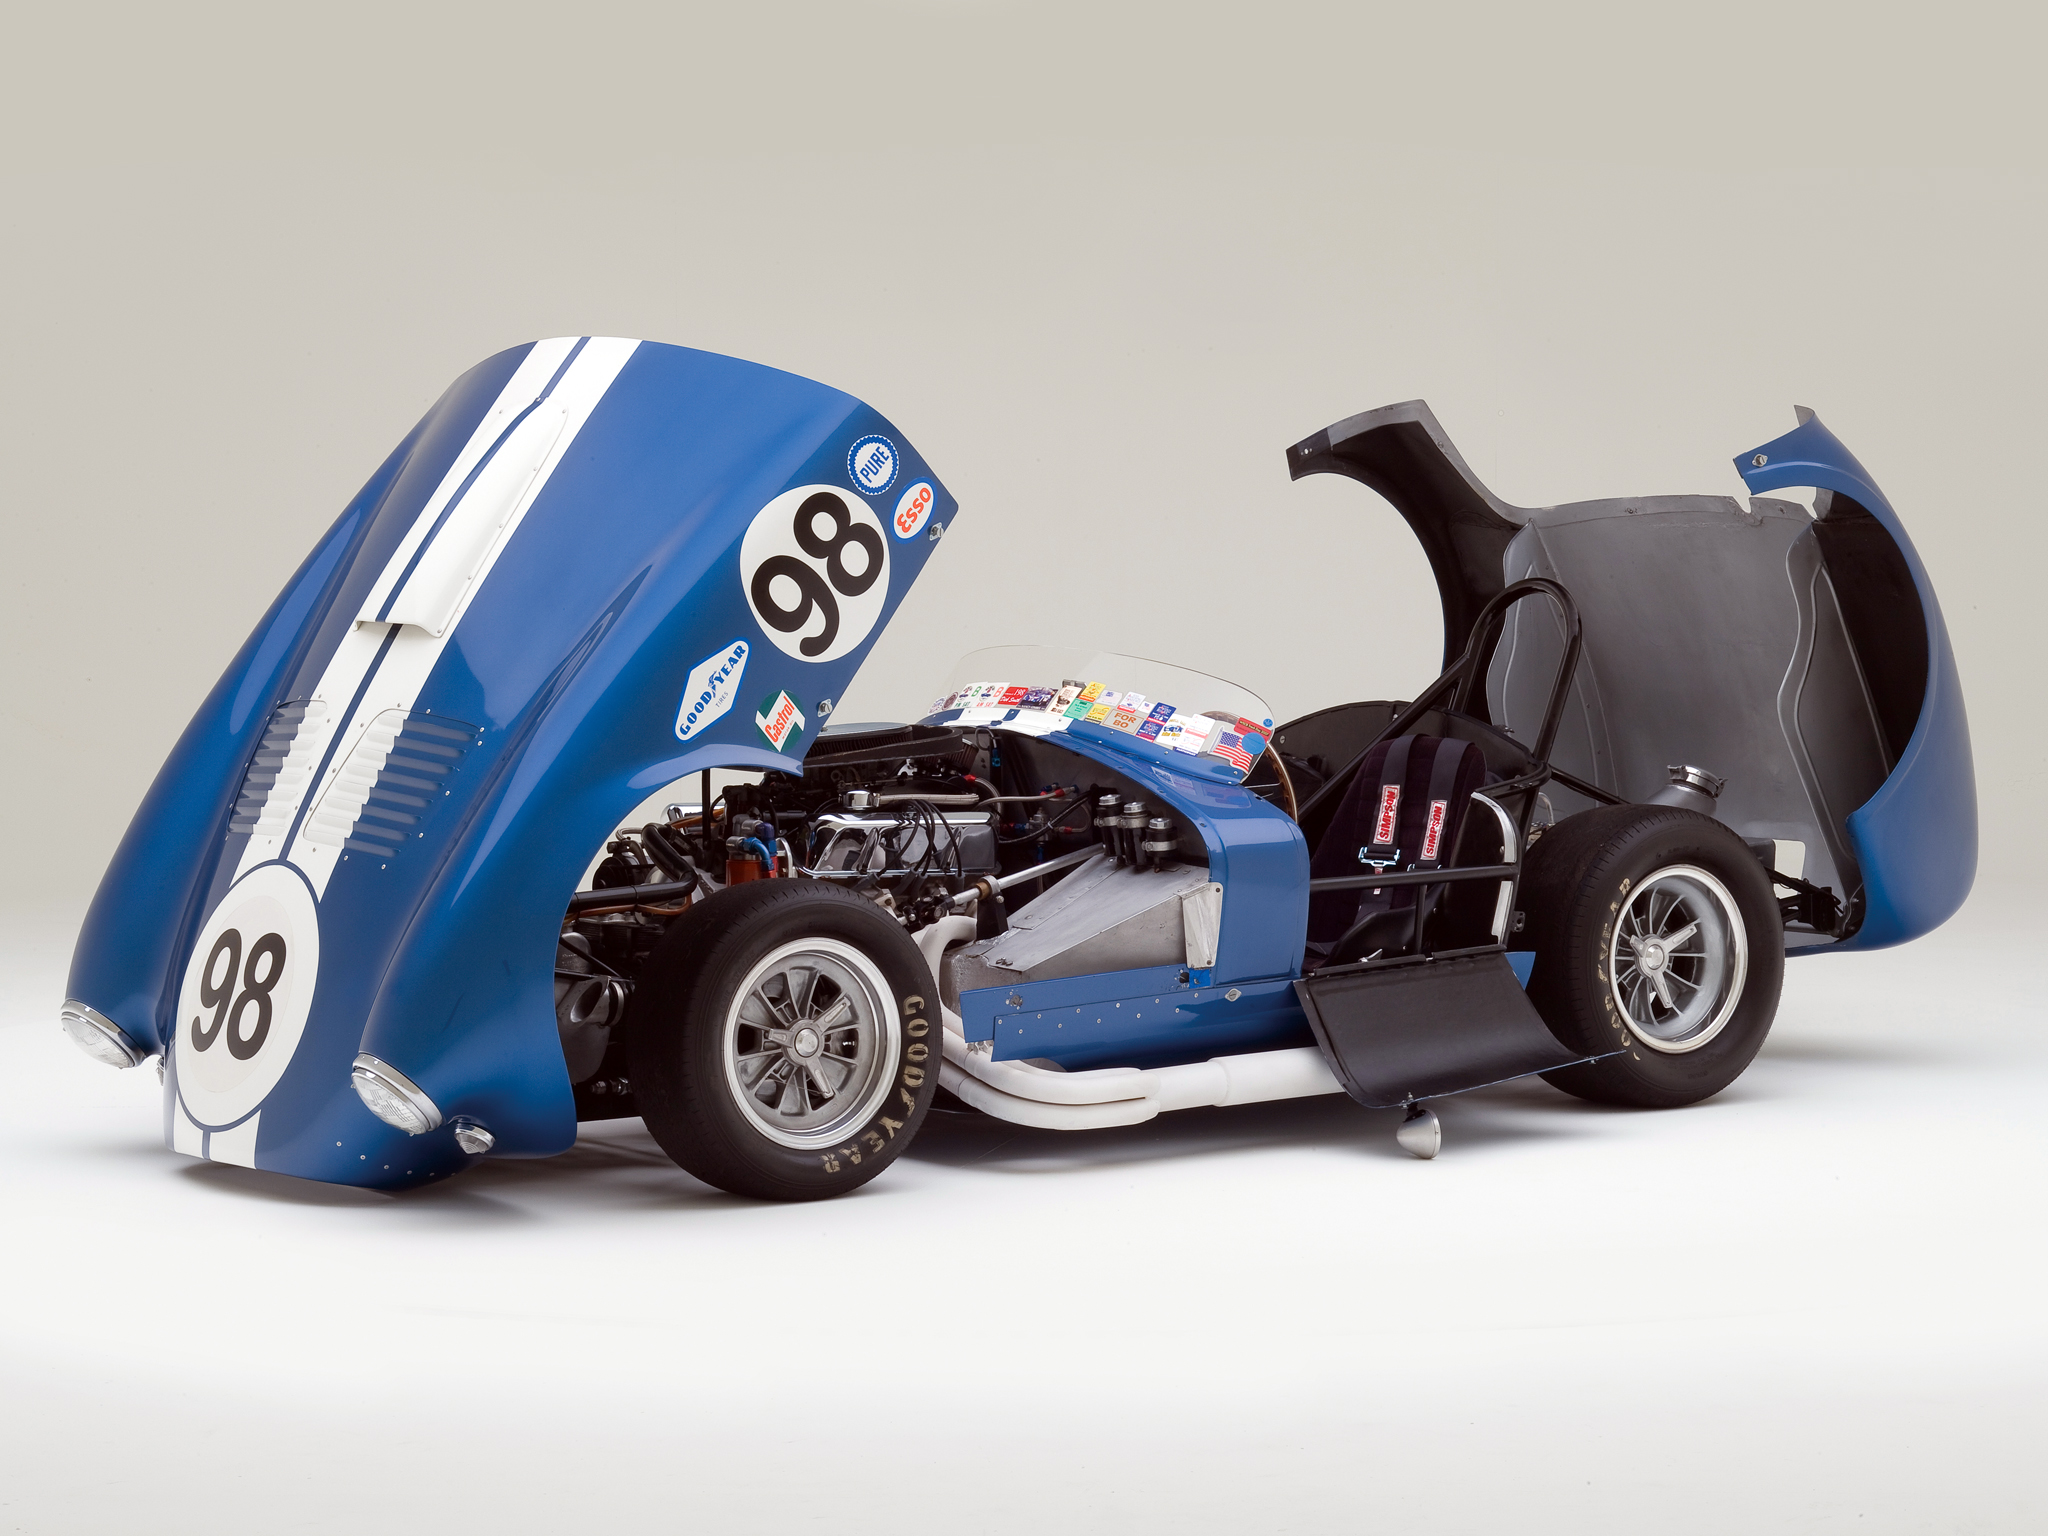 1964, Shelby, Cobra, 427, Prototype, Csx, 2196, Supercar, Supercars, Classic, Muscle, Race, Racing, Engine, Engines Wallpaper